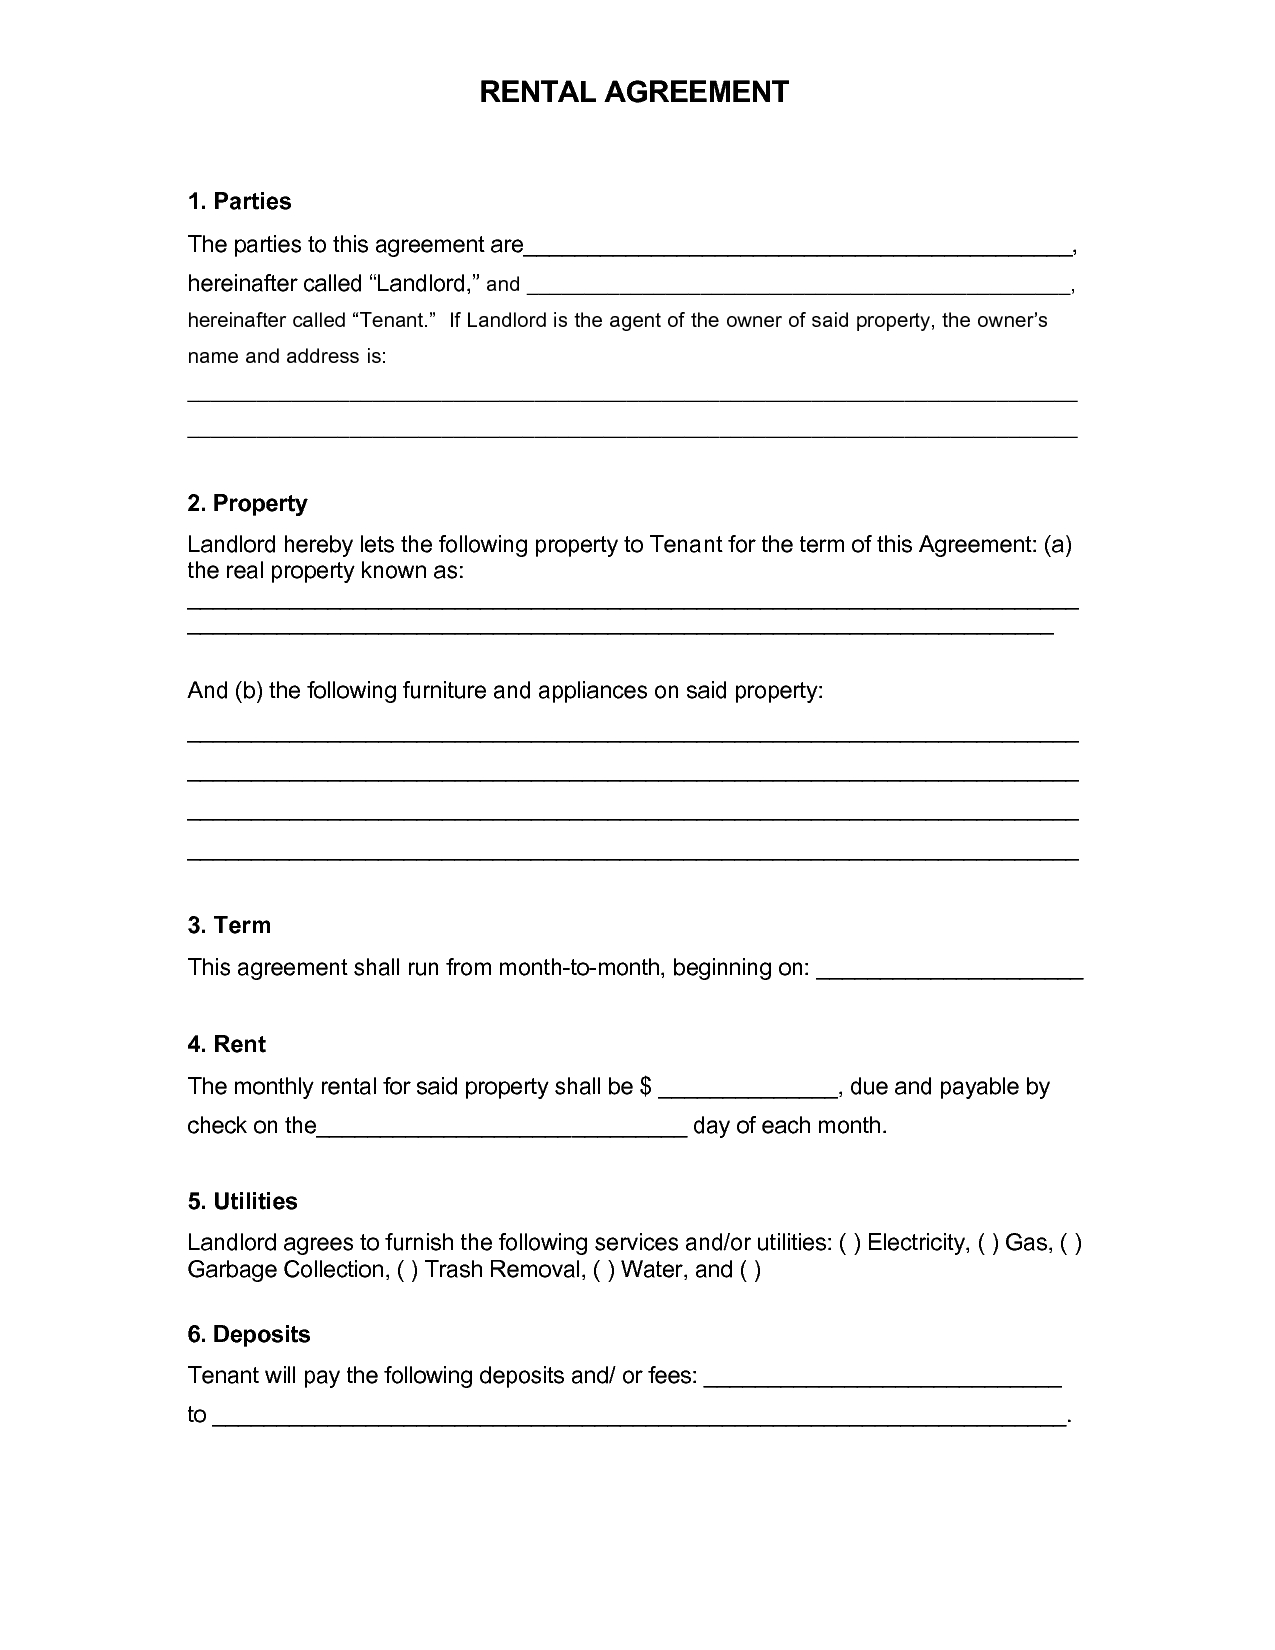 Rental Agreement Free Form 005 Template Ideas Free Rental Lease Agreement Form Pdf 693886